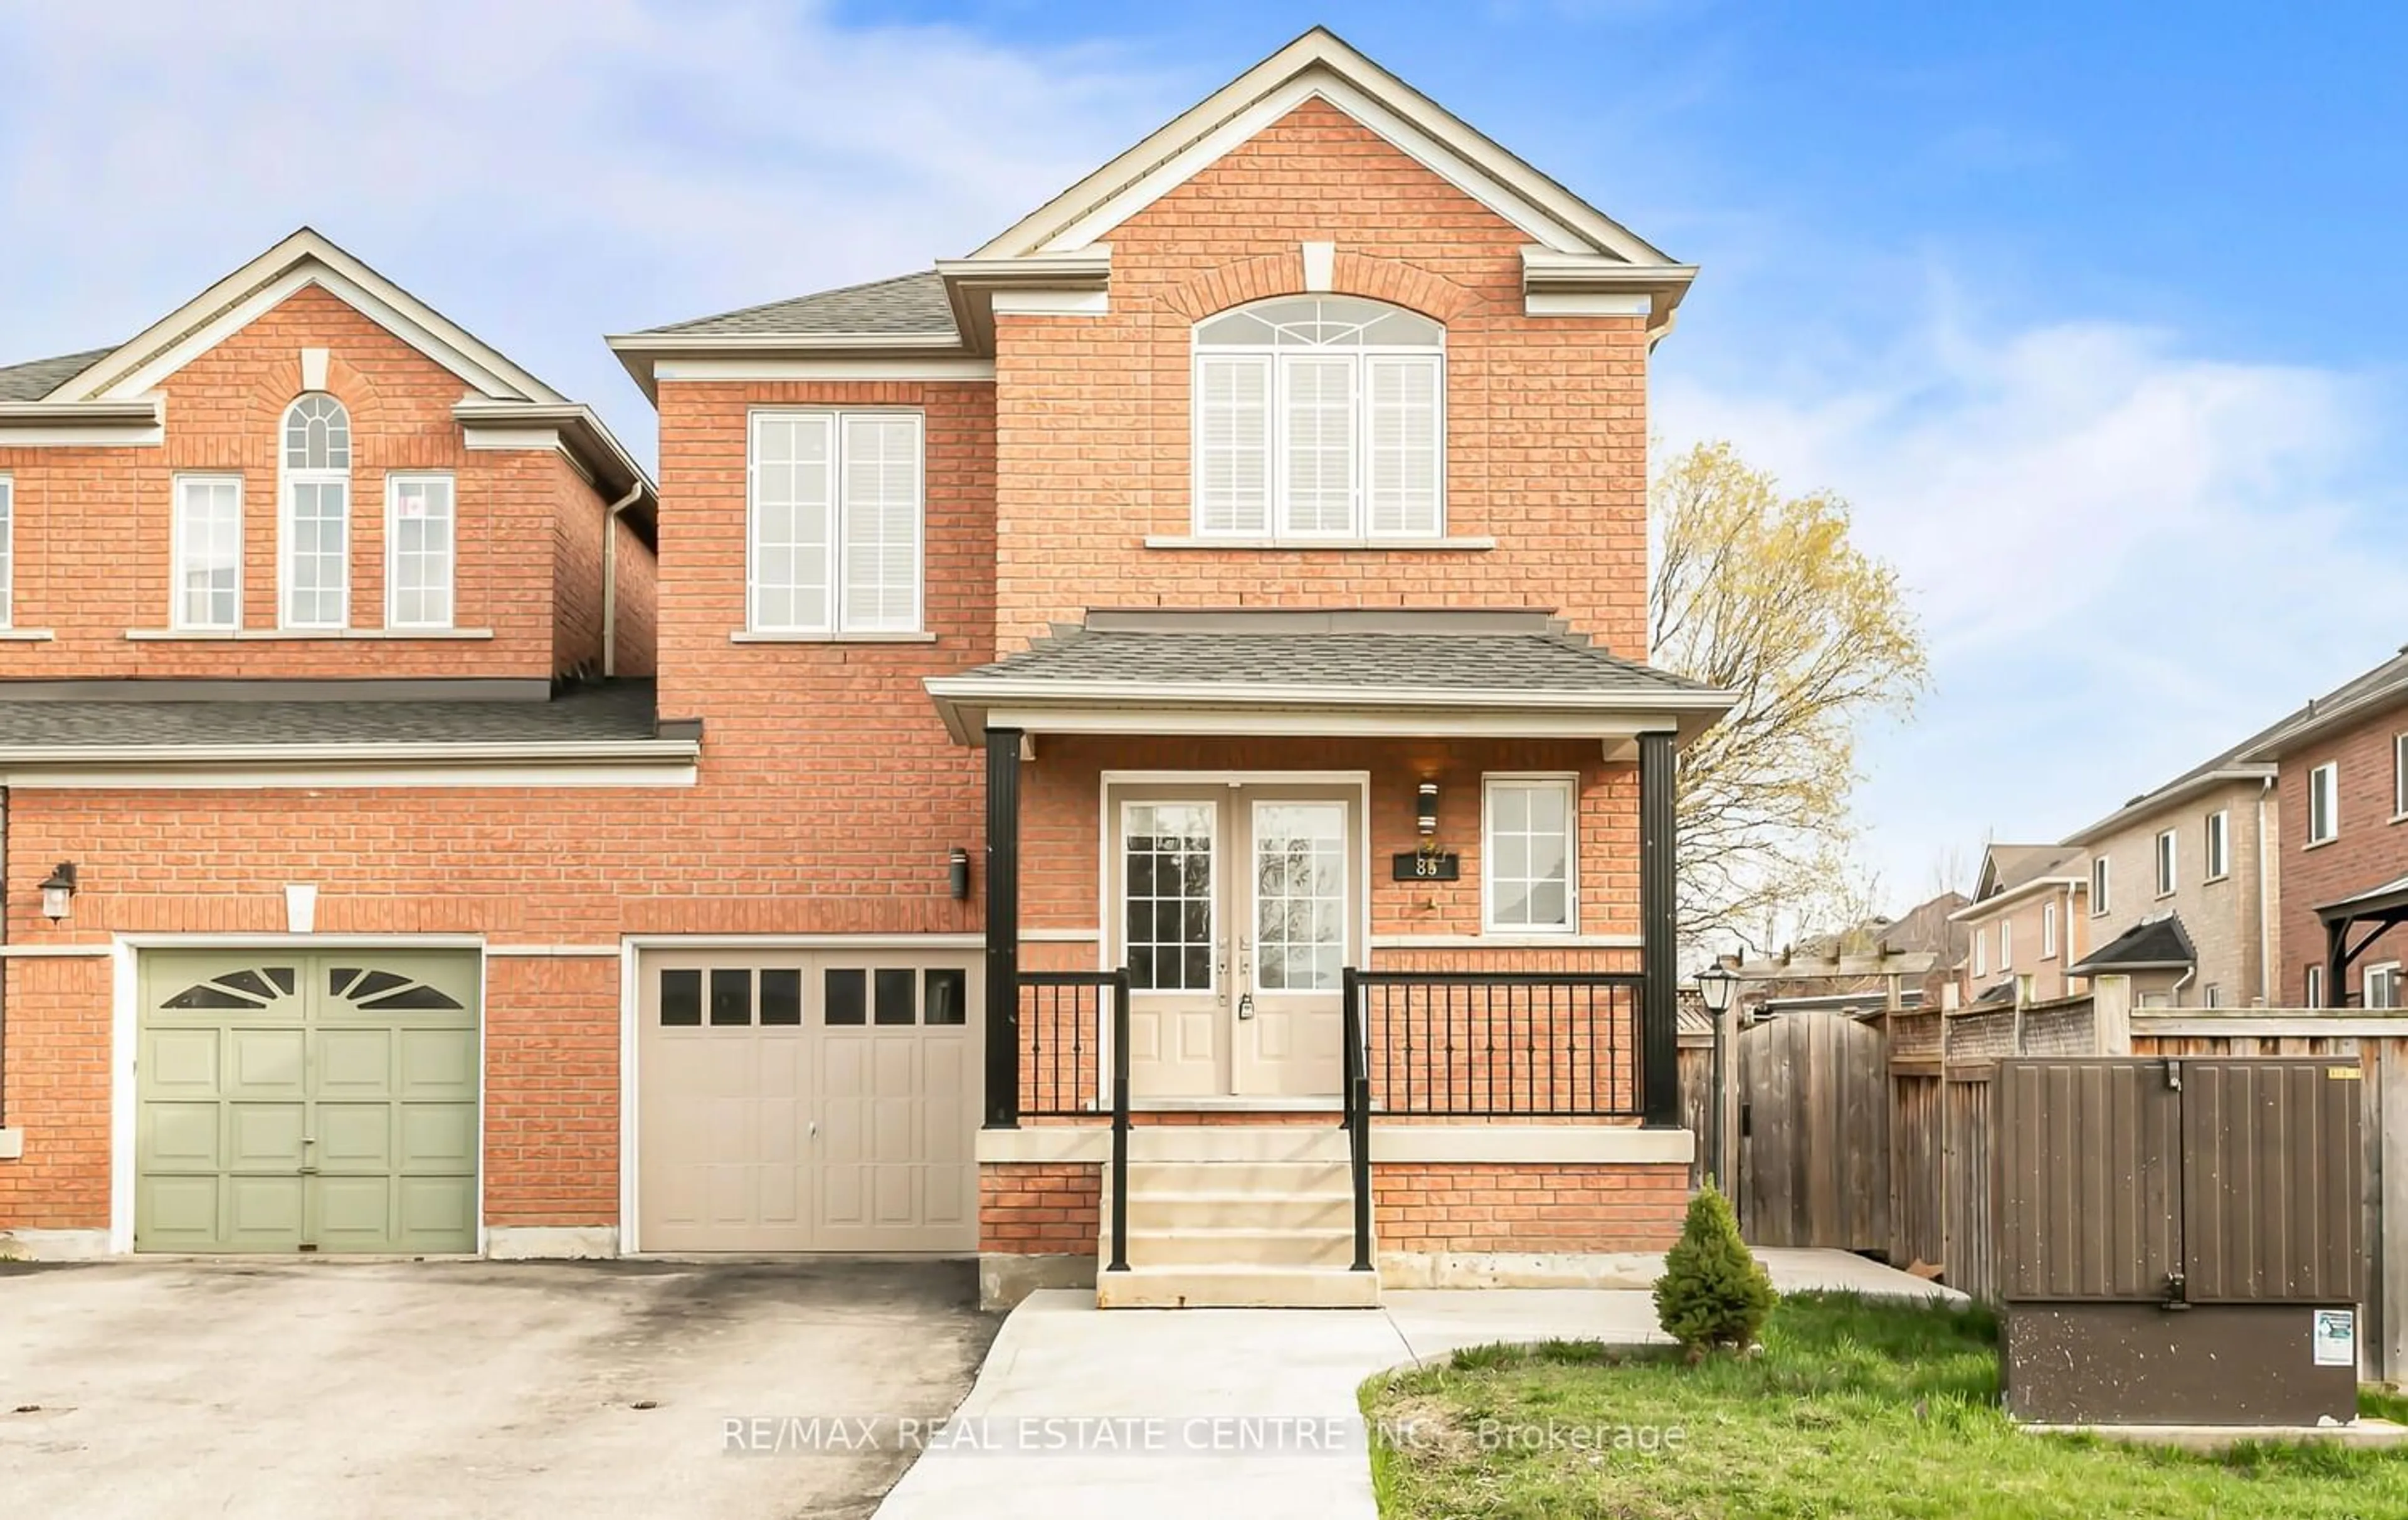 Home with brick exterior material for 85 Viceroy Cres, Brampton Ontario L7A 1V4